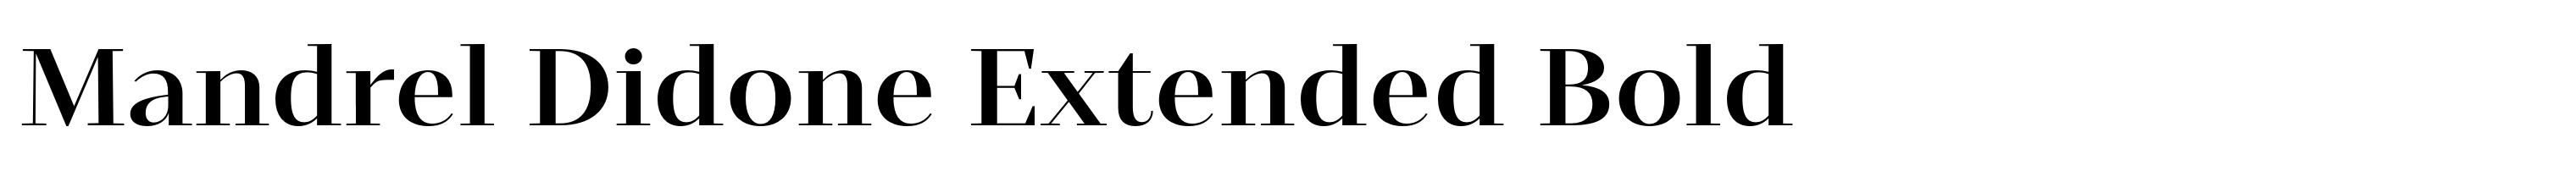 Mandrel Didone Extended Bold